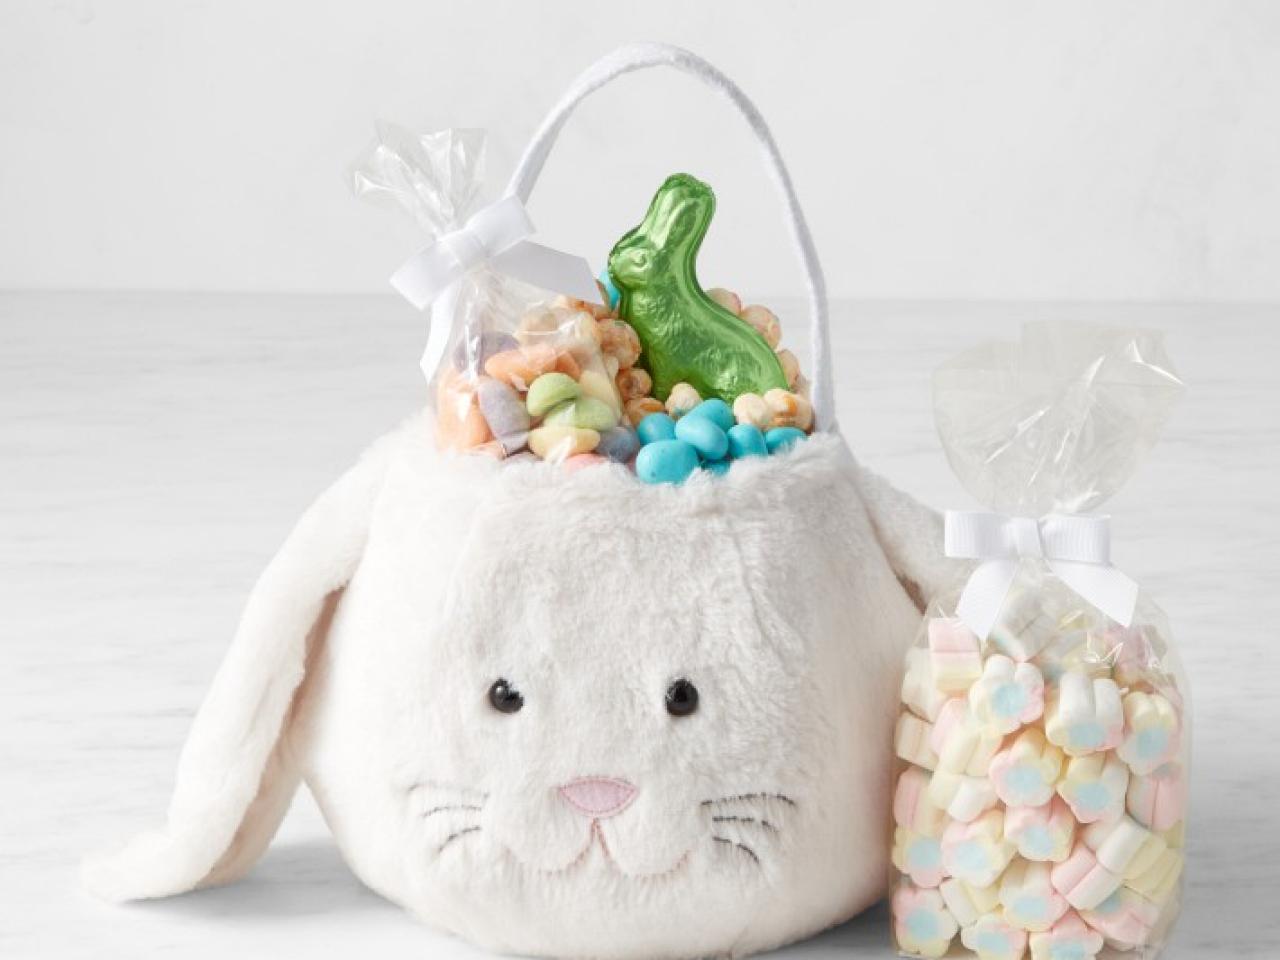 https://food.fnr.sndimg.com/content/dam/images/food/products/2023/3/7/rx_williams-sonoma-x-pottery-barn-kids-fur-bunny-easter-bucket.jpeg.rend.hgtvcom.1280.960.suffix/1678193647750.jpeg